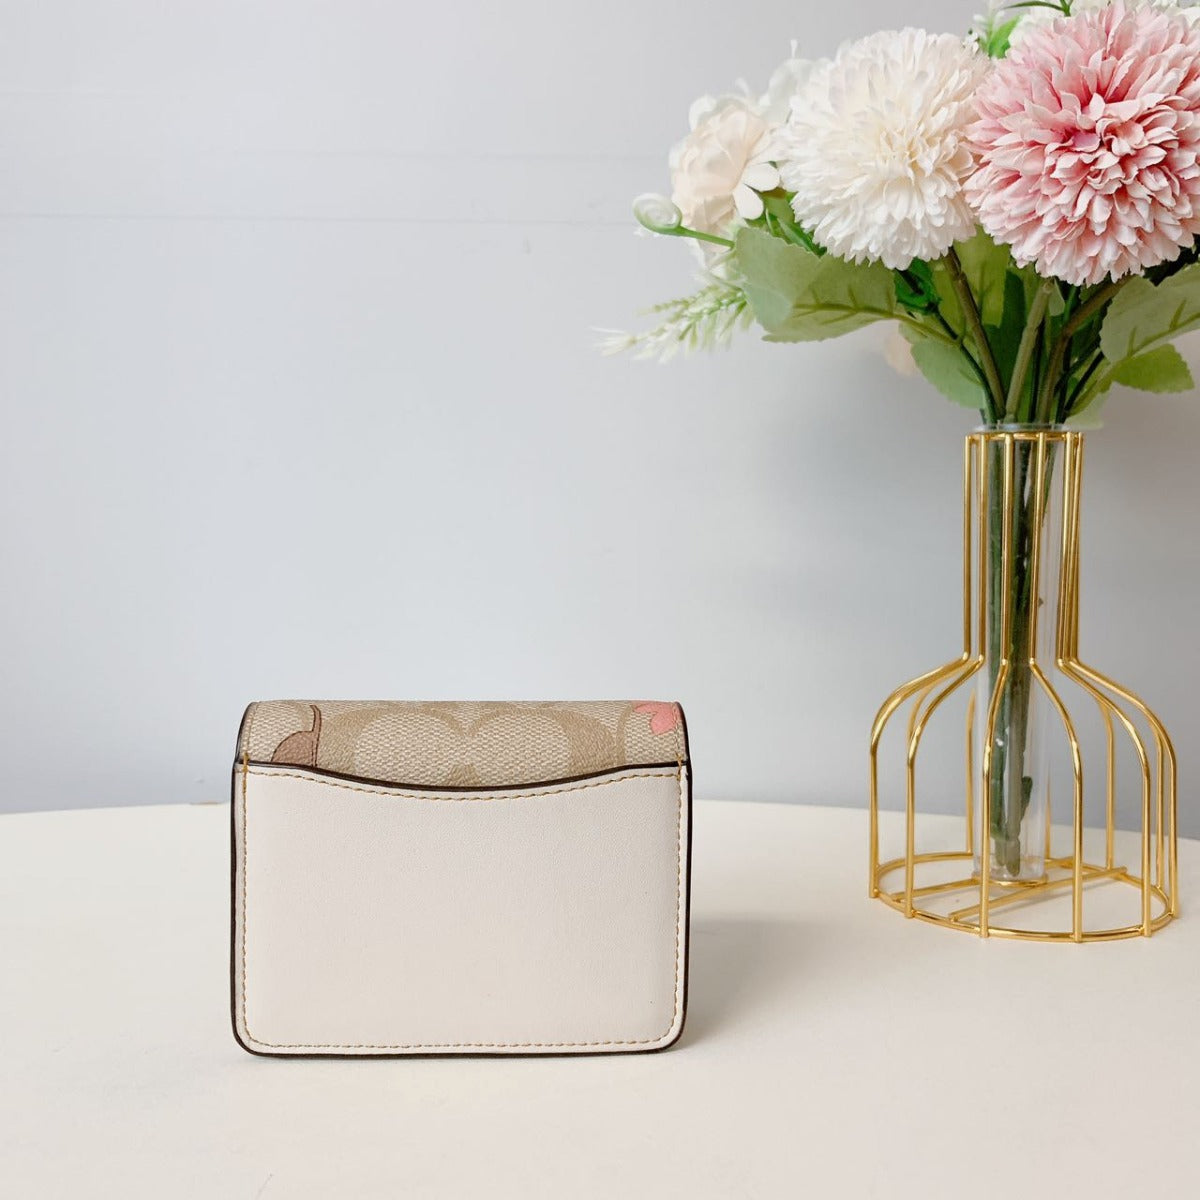 Coach CH714 Mini Wallet On A Chain In Signature Canvas With Floral Cluster Print IN Light Khaki Multi